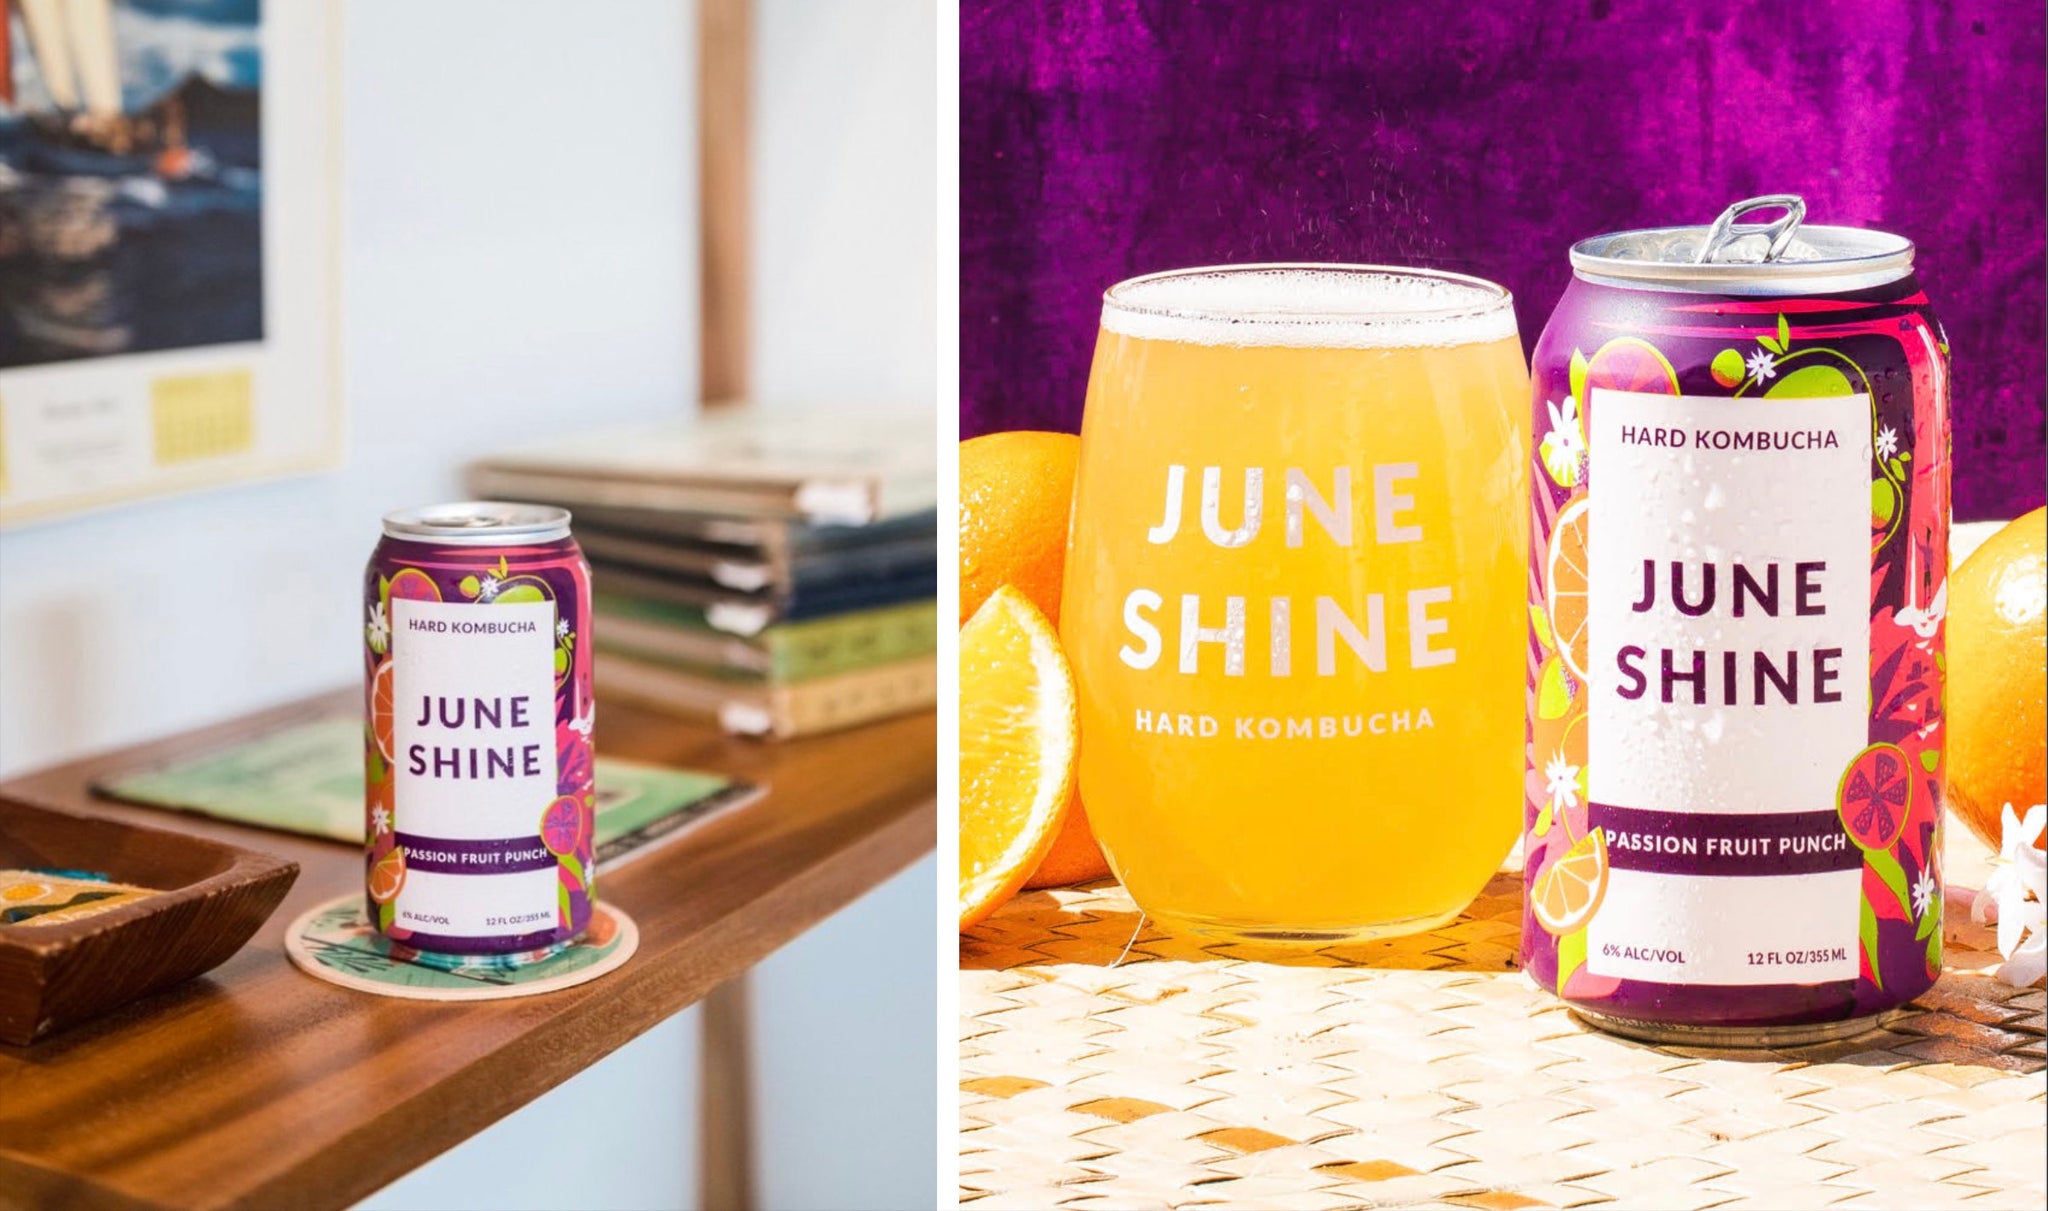 Two images of JuneShine Passion Fruit Punch cans with artwork by Nick Kuchar 